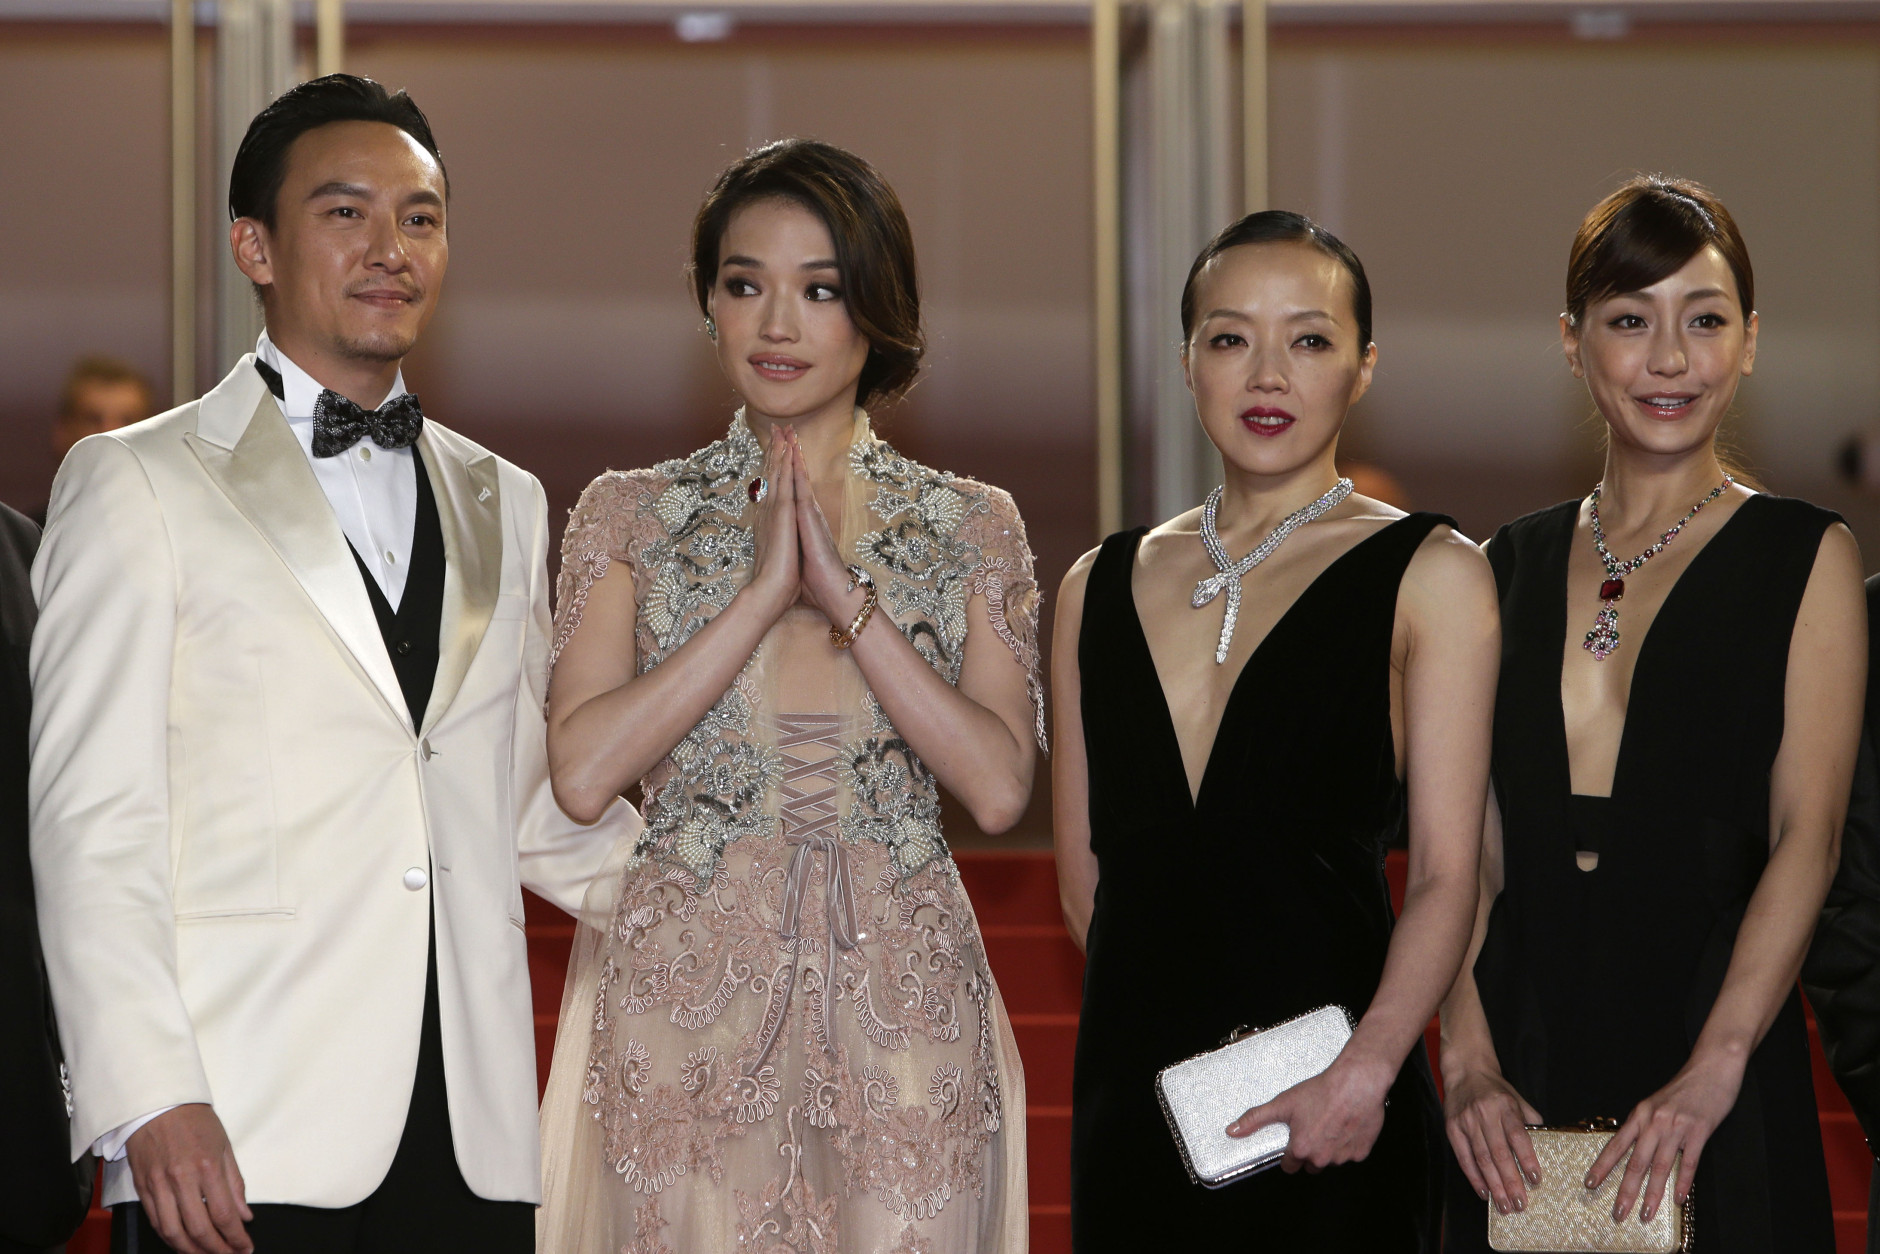 From left, actors Chang Chen, Shu Qi, Sheu Fang-Yi, and Hsieh Hsin-Ying pose for photographers as they arrive for the screening of the film Nie Yinniang (The Assassin) at the 68th international film festival, Cannes, southern France, Thursday, May 21, 2015. (AP Photo/Lionel Cironneau)